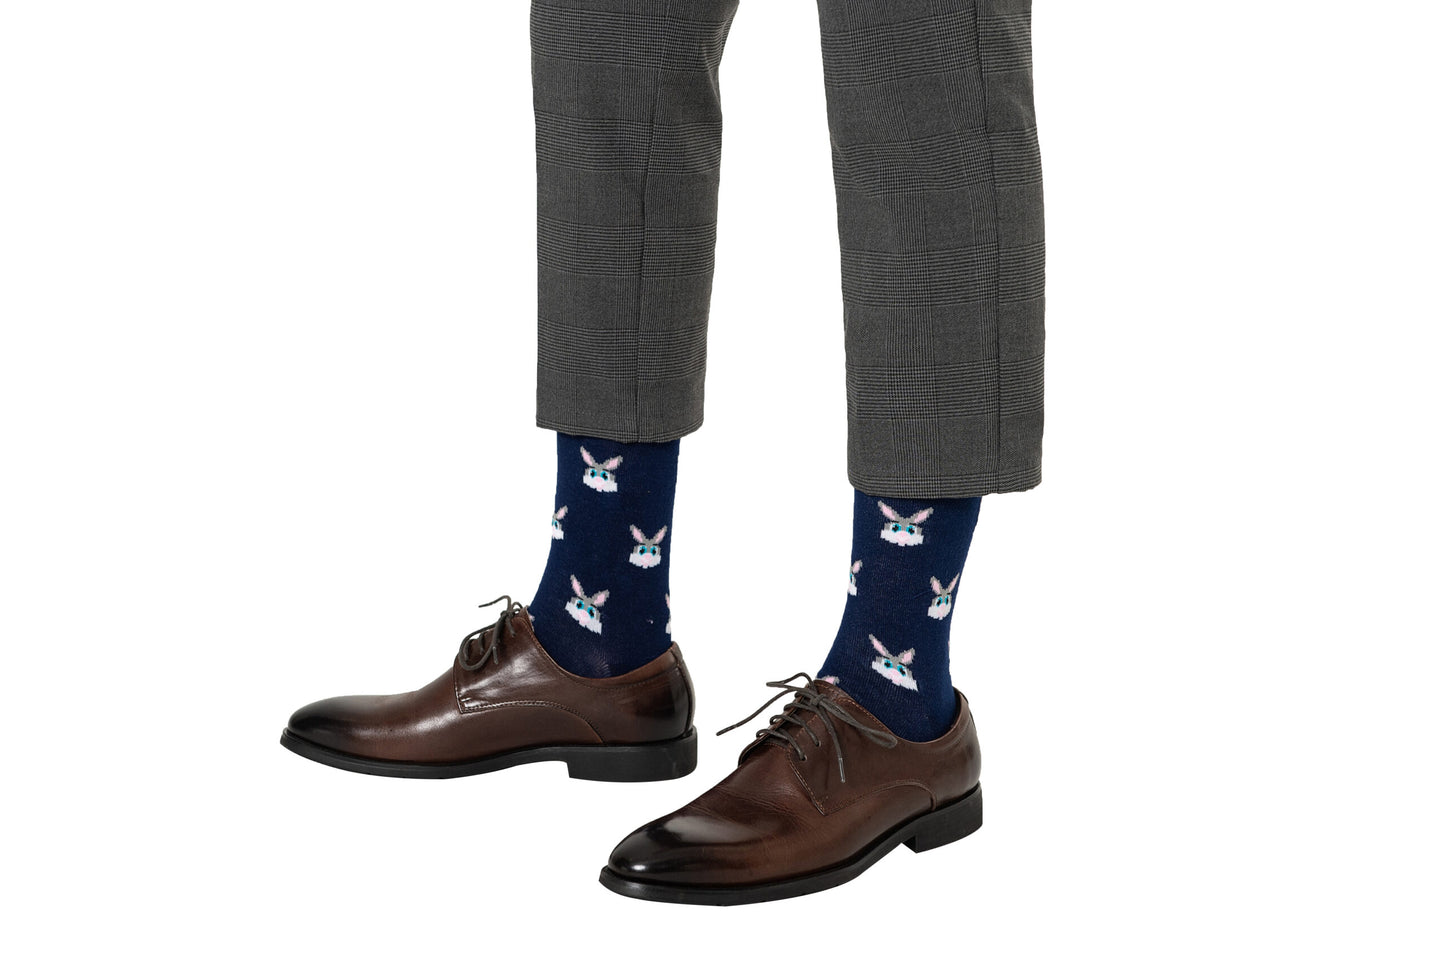 A man wearing a pair of Bunny Socks.